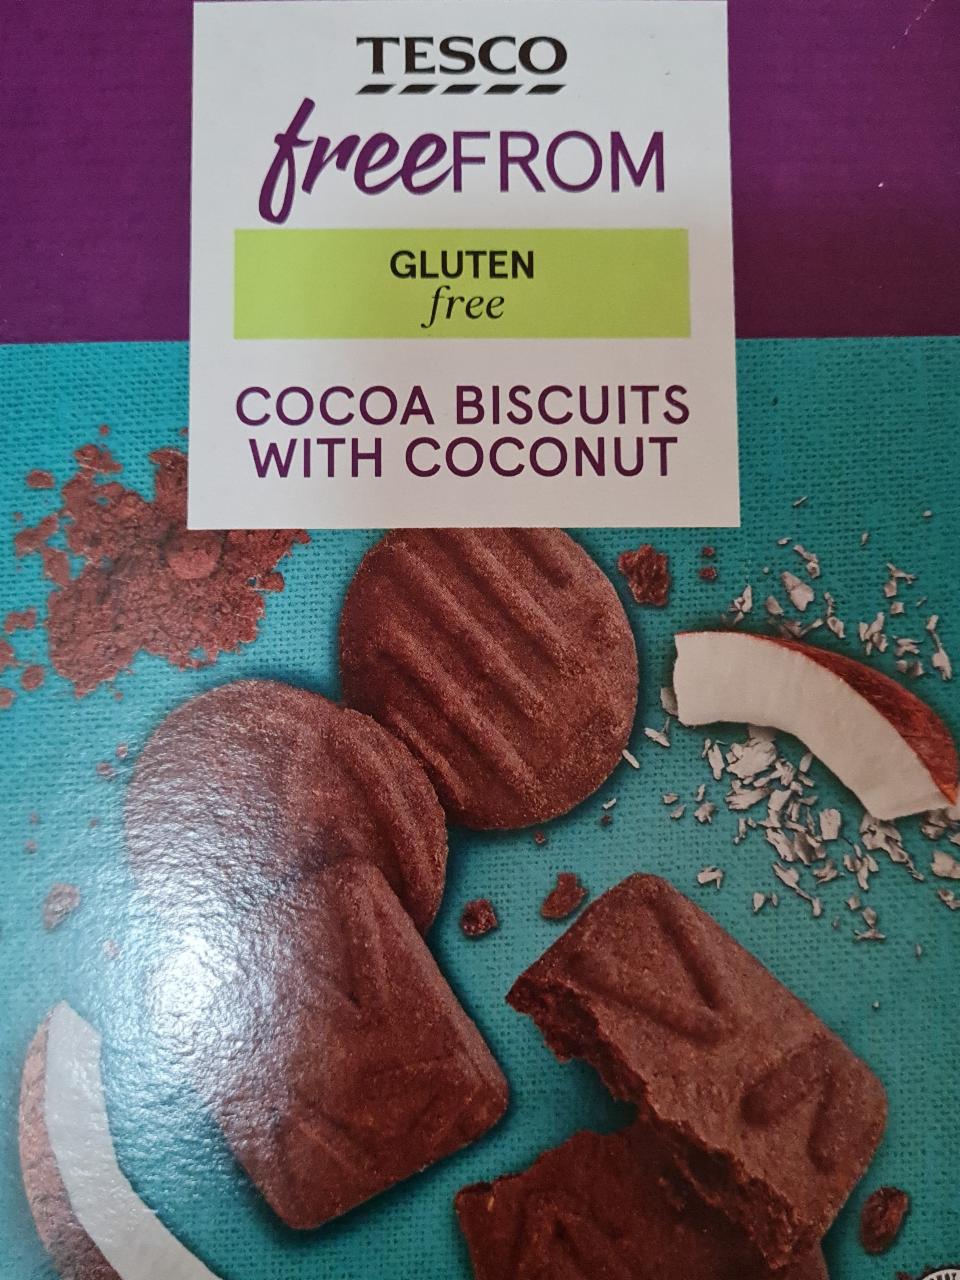 Fotografie - Cocoa Biscuits with Coconut Gluten free Tesco free From